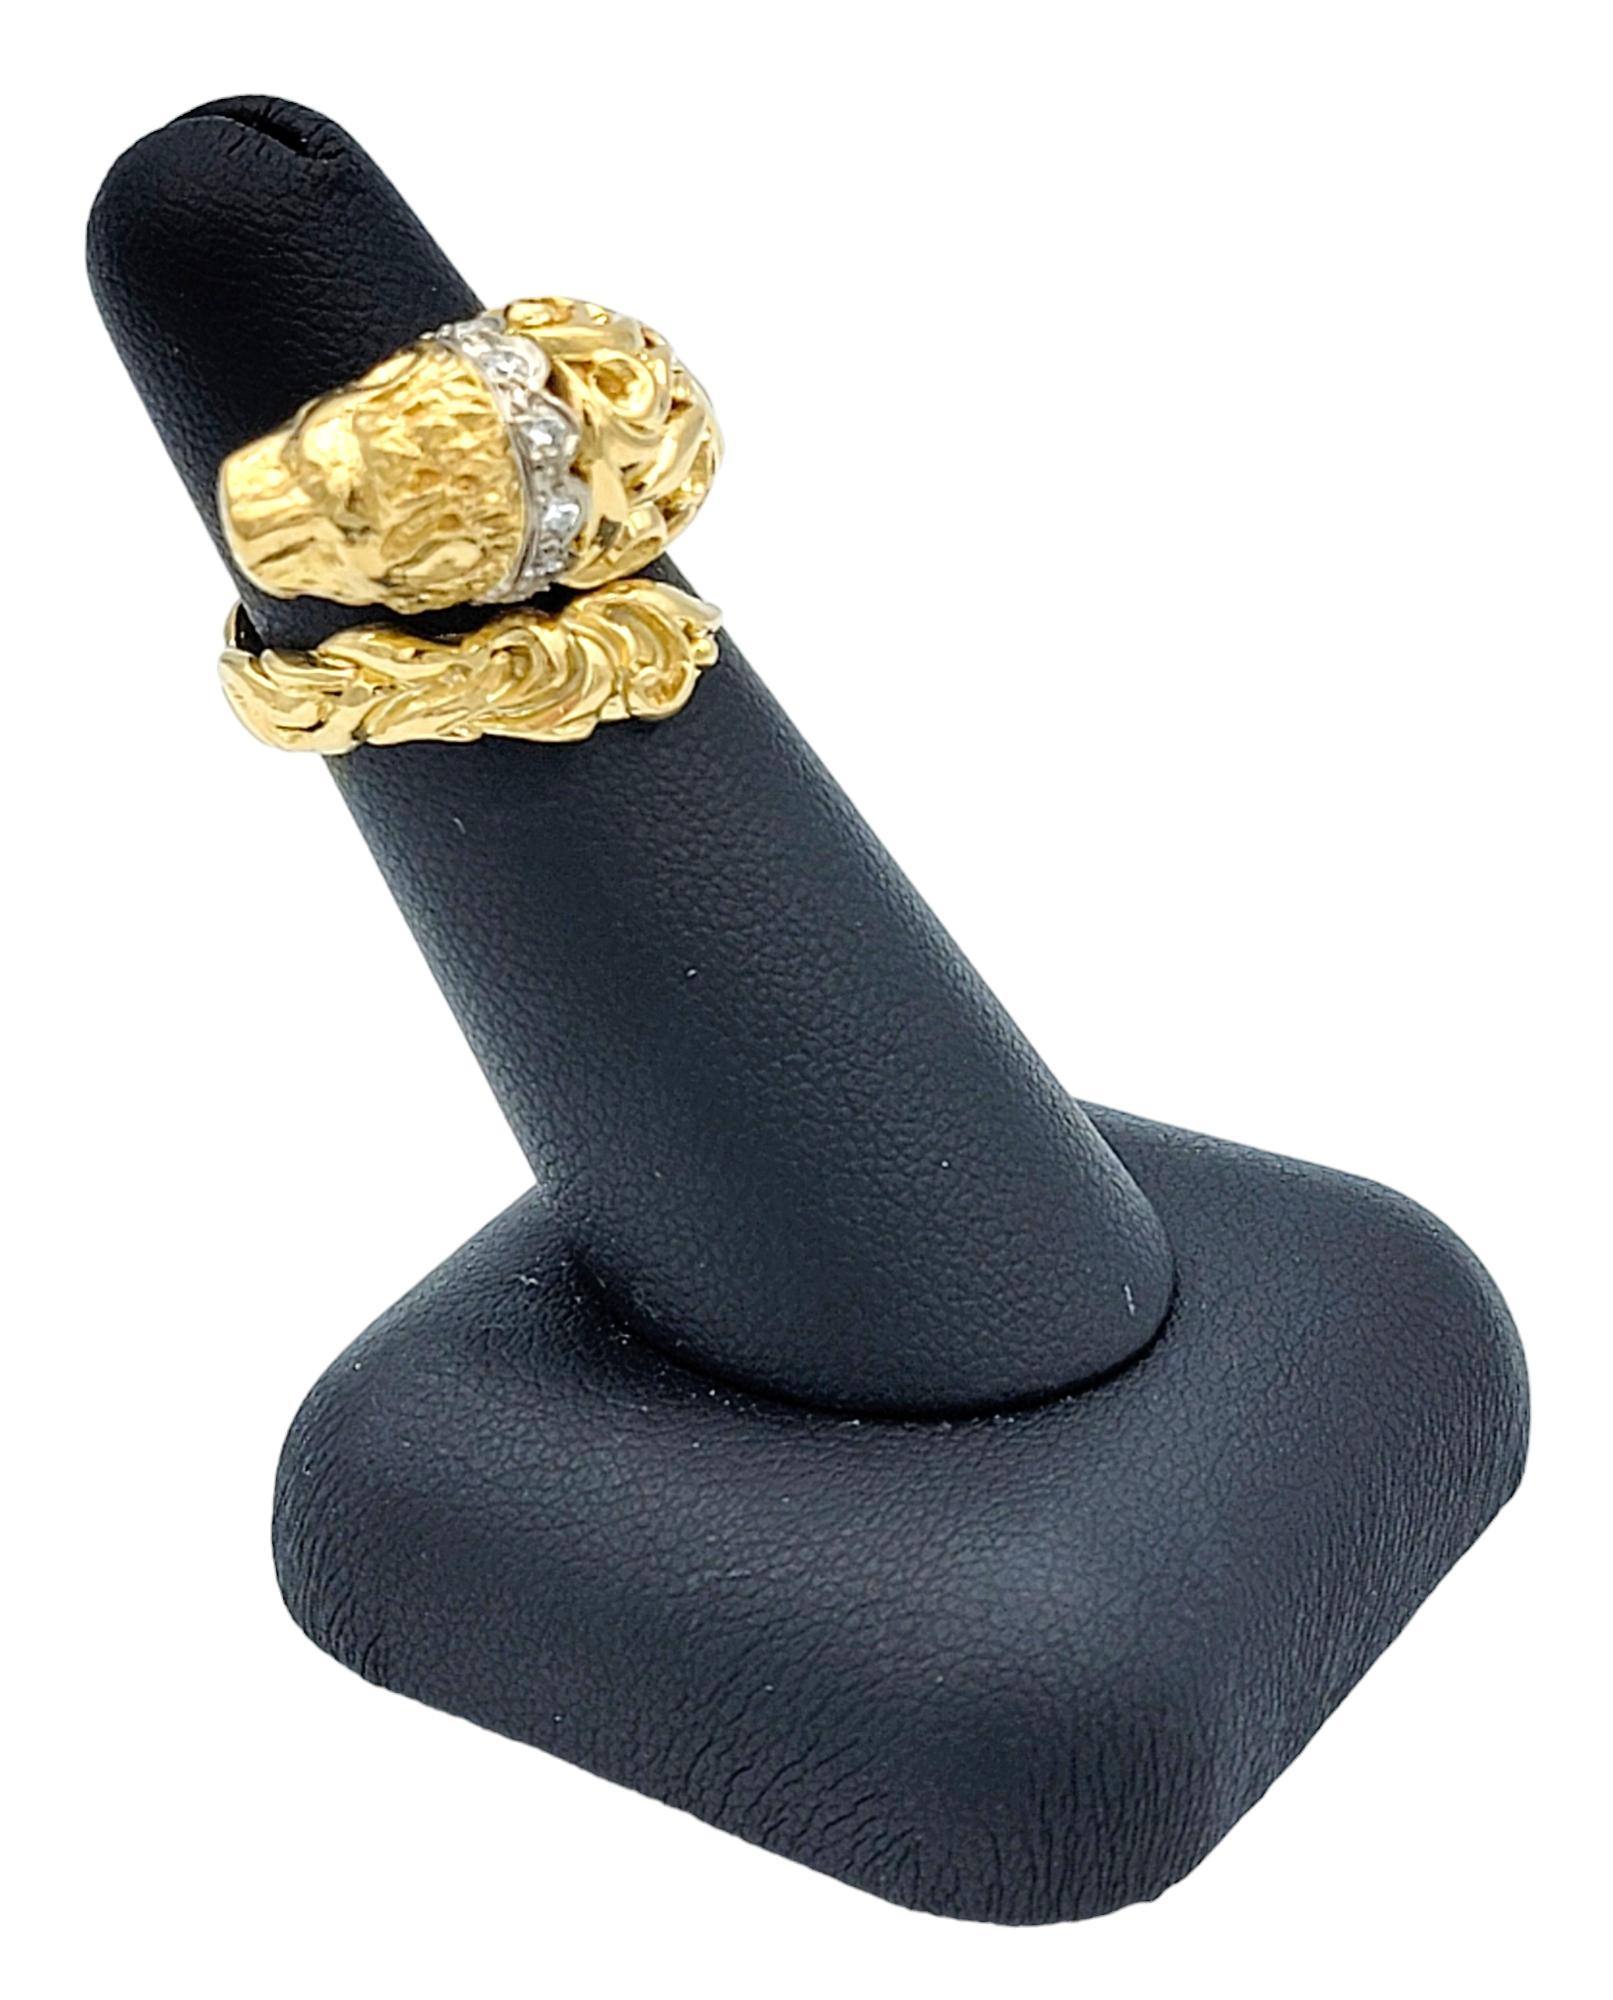 Lion Bypass Style Ring with Diamond Collar Set in 14 Karat Yellow and White Gold For Sale 3